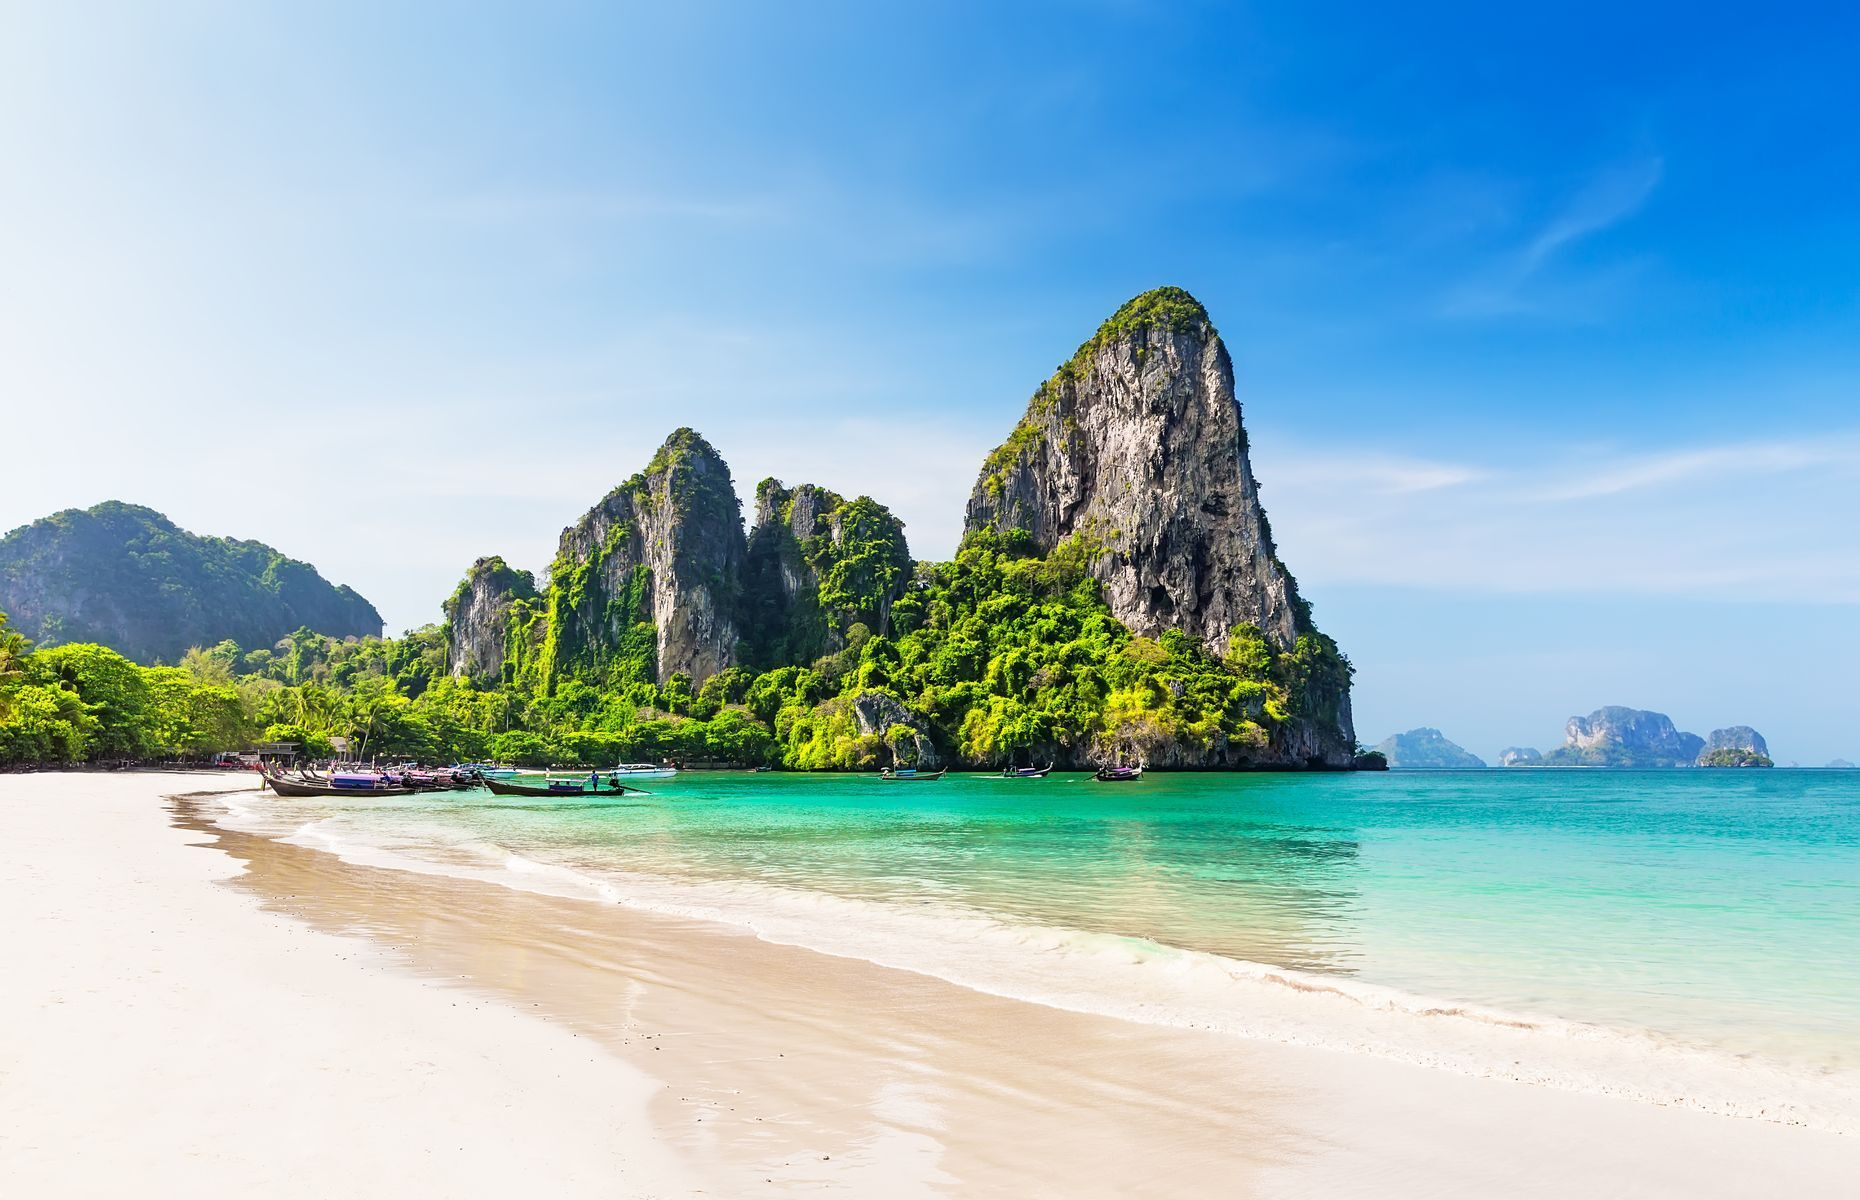 <p>Located in southern Thailand’s <a href="https://www.tourismthailand.org/Destinations/Provinces/Krabi/344" class="atom_link atom_valid" rel="noreferrer noopener">Krabi province</a>, <a href="https://www.weseektravel.com/phra-nang-beach/" class="atom_link atom_valid" rel="noreferrer noopener">Railay</a> Beach is a tropical paradise nestled between limestone cliffs on the Andaman Sea. Its fine sand and clear waters offer exceptional opportunities for swimming and kayaking. Accessible by boat, the site includes Phra Nang, just off Railay Beach, and other explorable caves with imposing stalactites.</p>